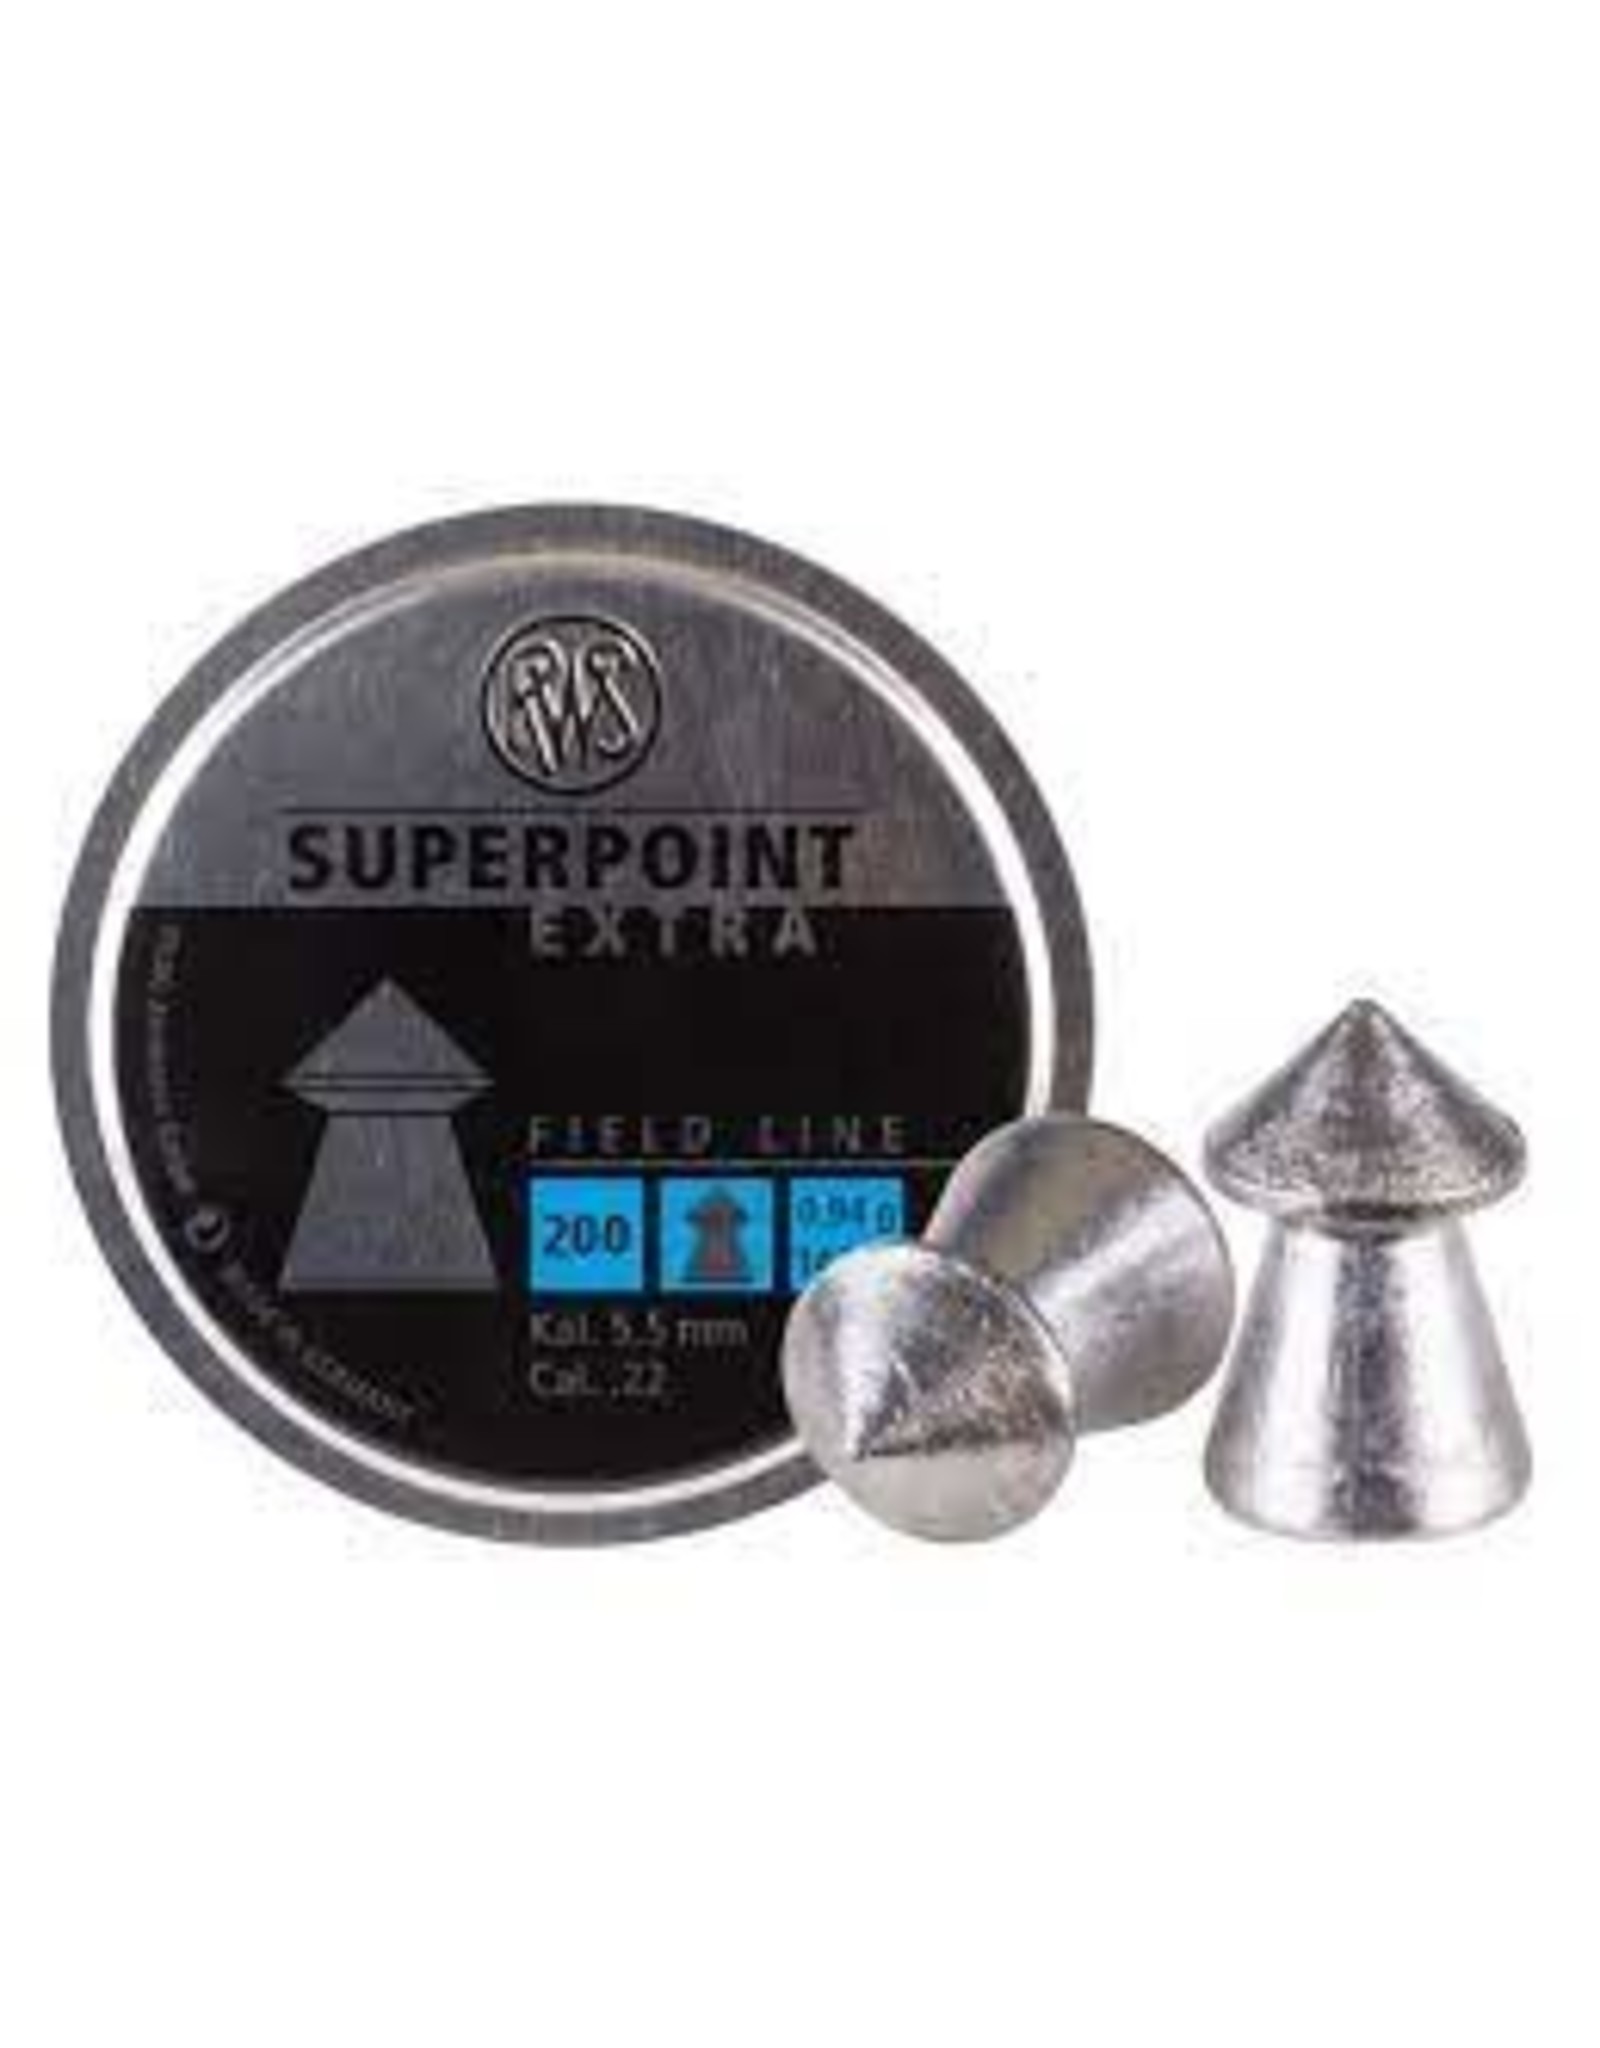 RWS RWS Superpoint Extra .22 Pellet, 14.5 Grains, Pointed, 200ct by RWS